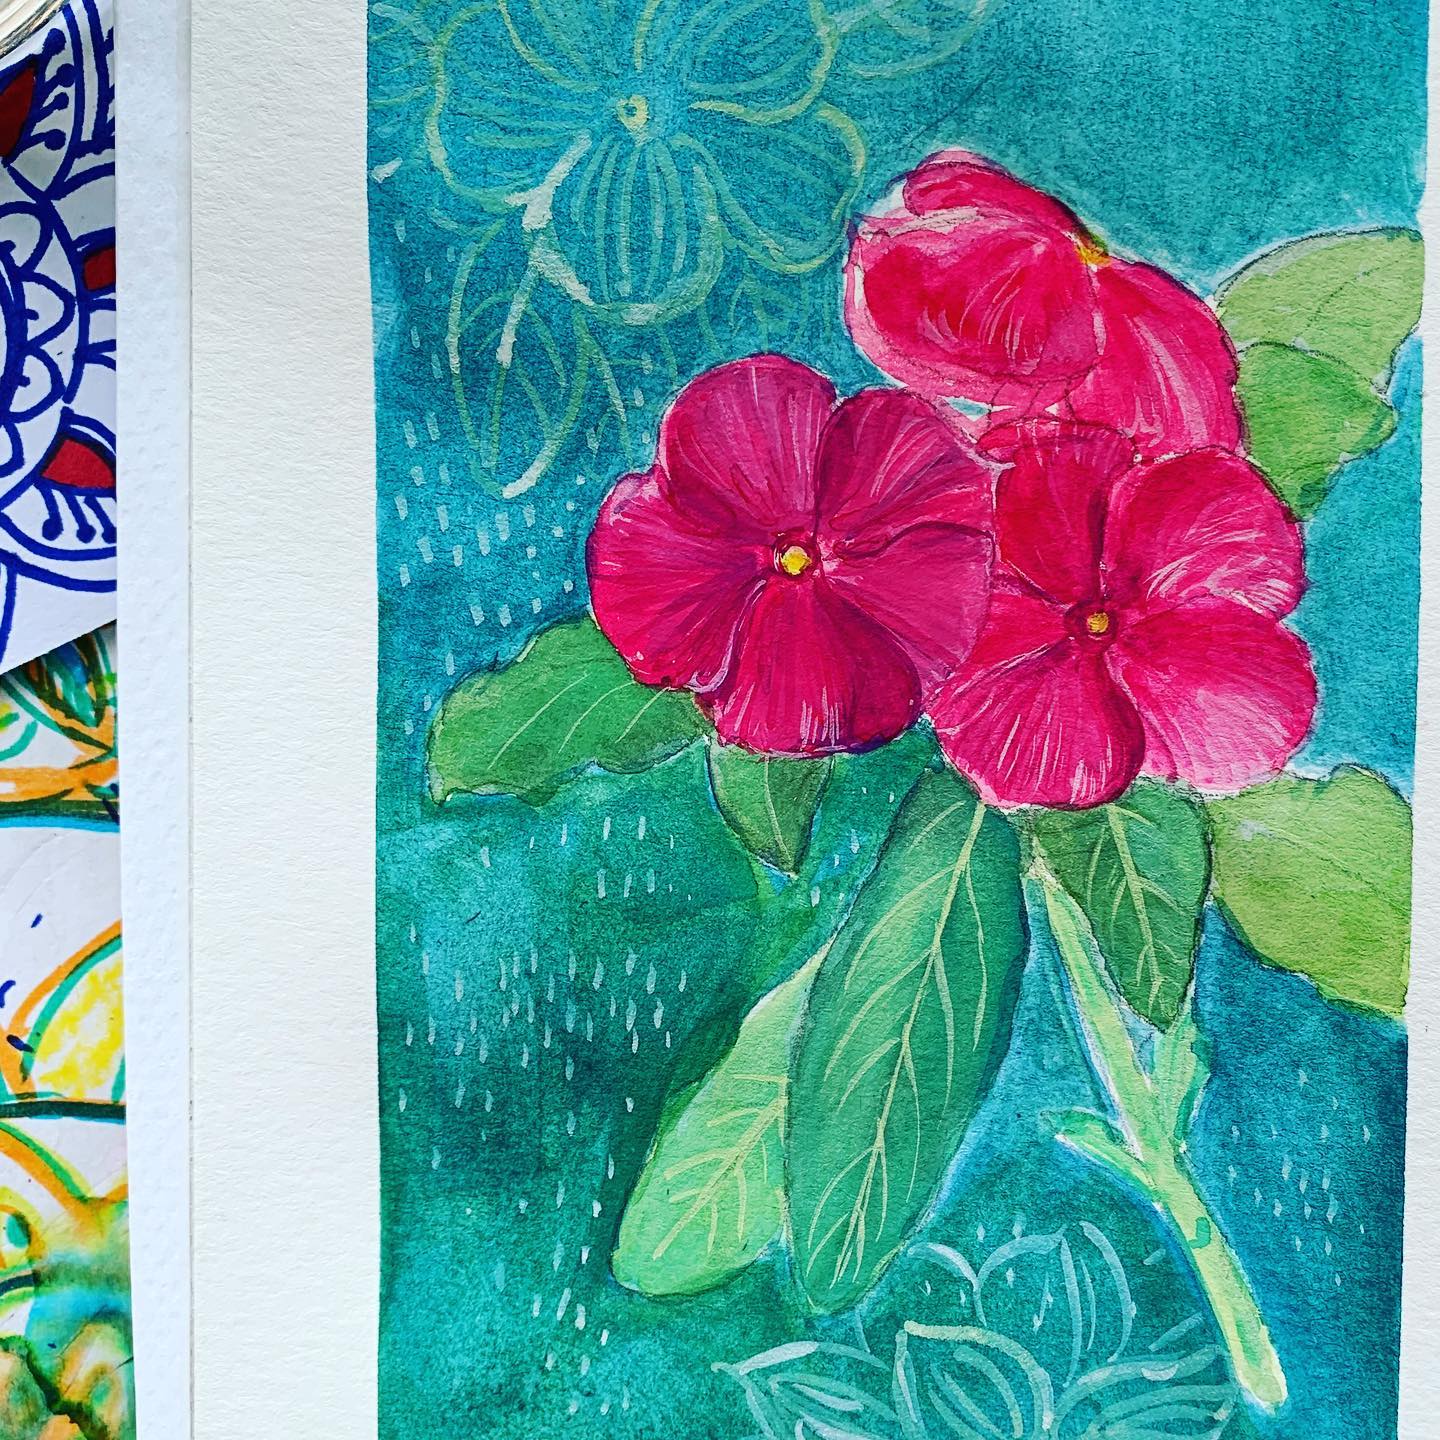 The Madagascar Periwinkle is a symbol of purity and strength. Enjoyed creating it today in my tiny watercolor journal using gouache.